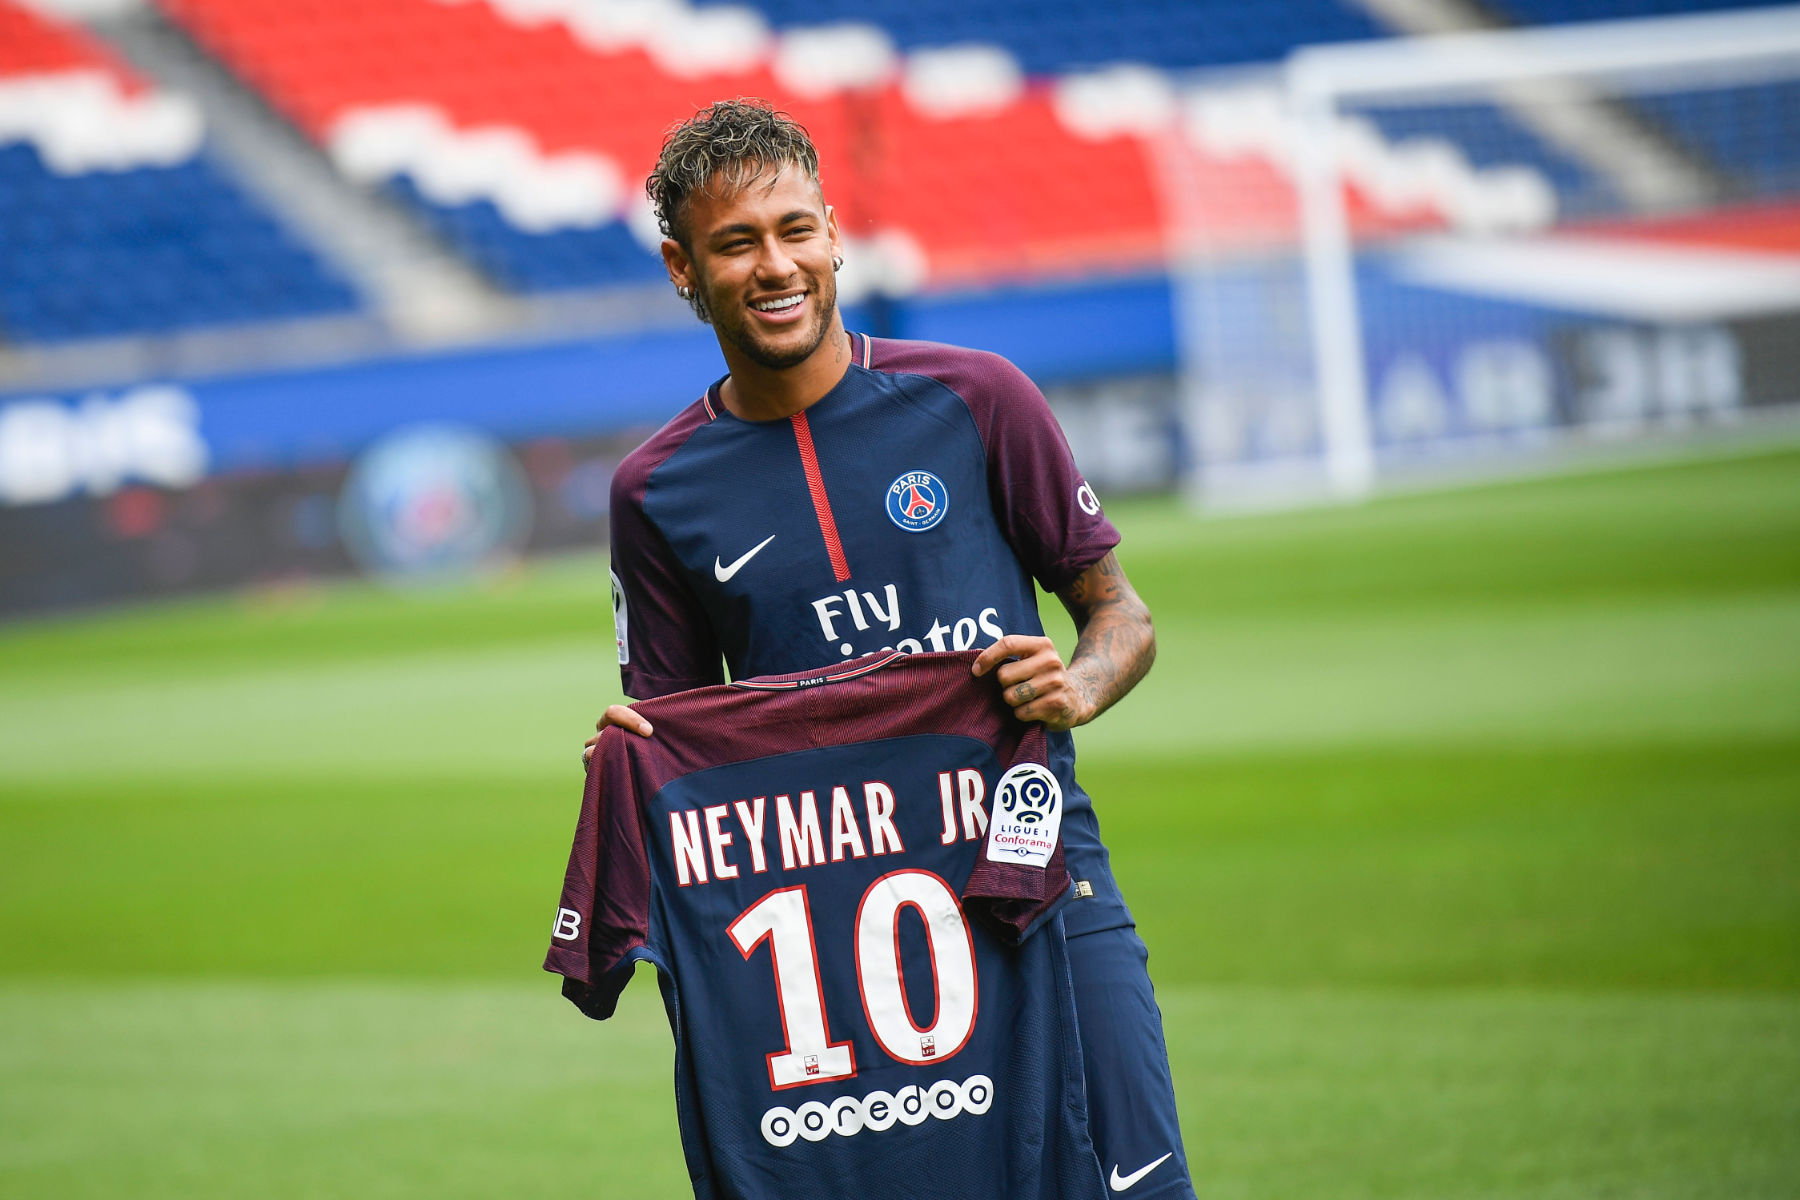 Neymar is One of the Worst Transfers of 